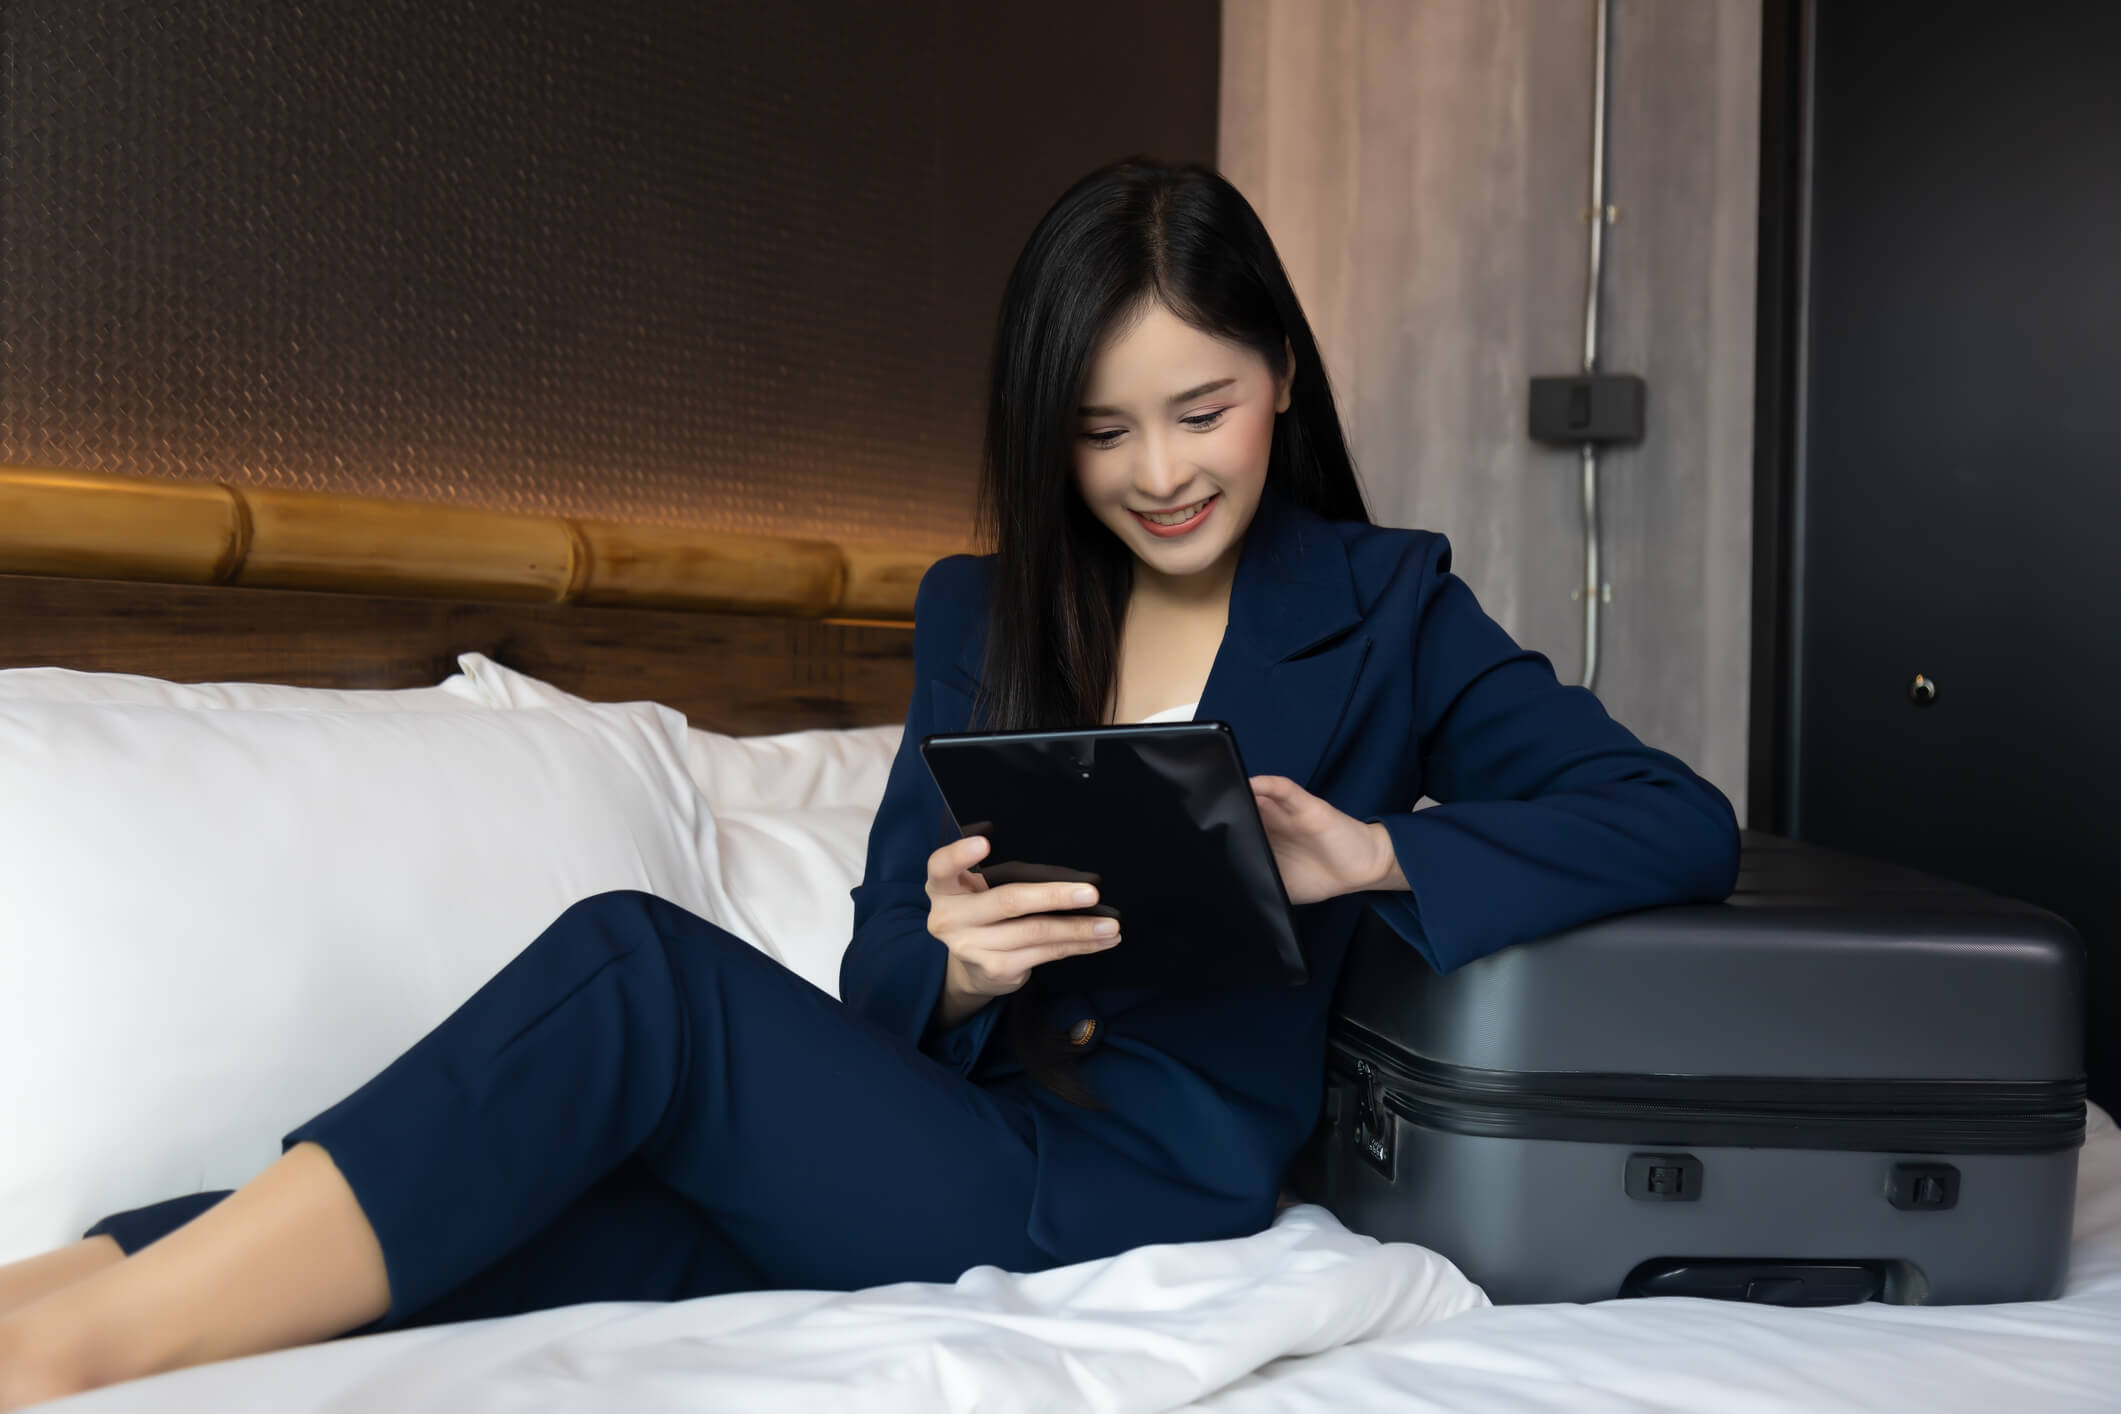 Future-proof hospitality solutions for modern hotels